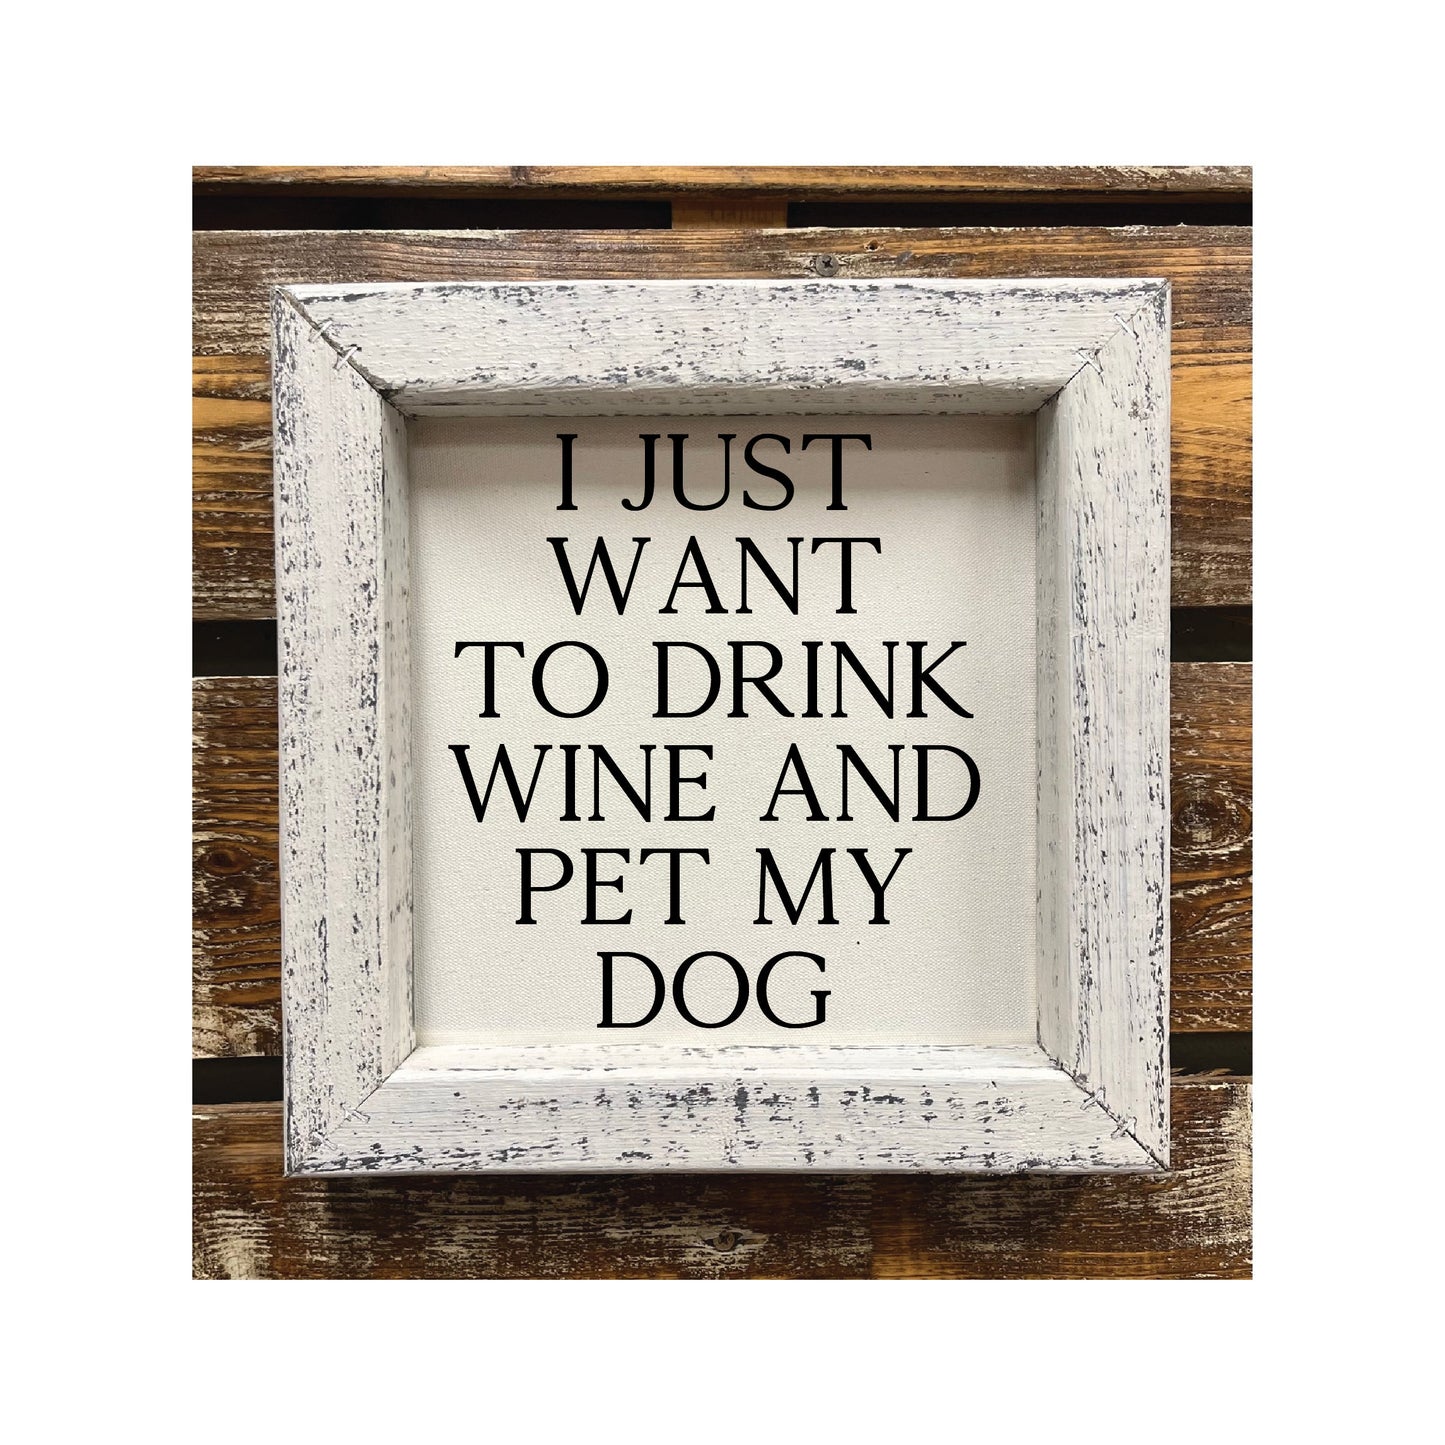 I Just Want to Drink Wine and Pet My Dog